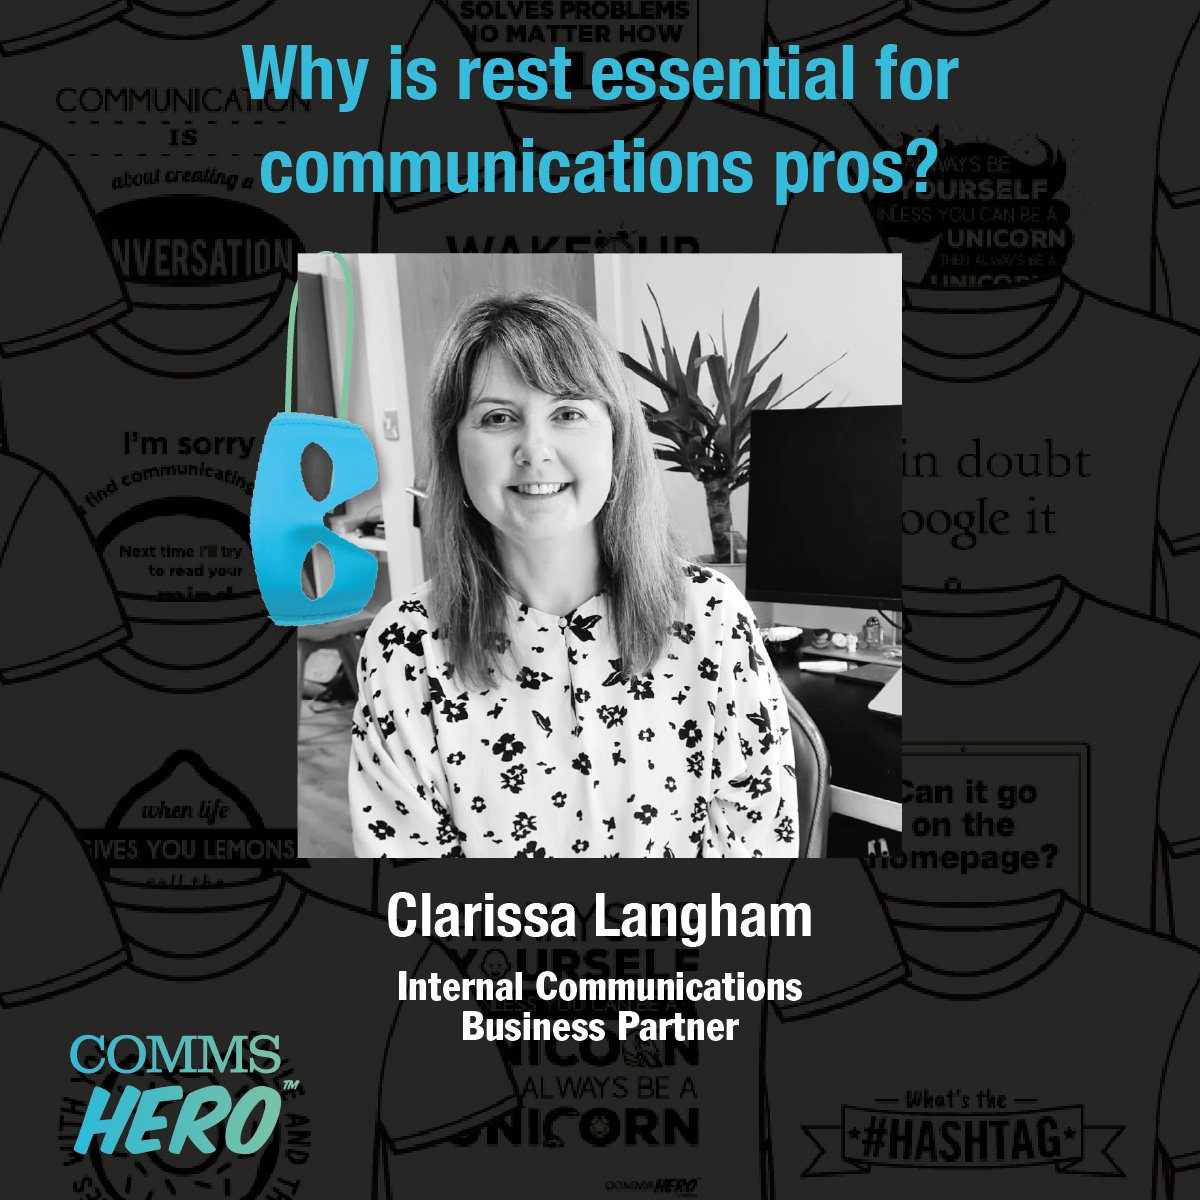 CommsHeroes need a rest too! 

As comms pros, we often promote wellbeing resources via internal comms. @clarissalangham joins us on the #CommsHero podcast to talk about the ‘4 Cs’ – different types of rest she focuses on to rebalance.

Listen here: ow.ly/9lTT50MBaPF